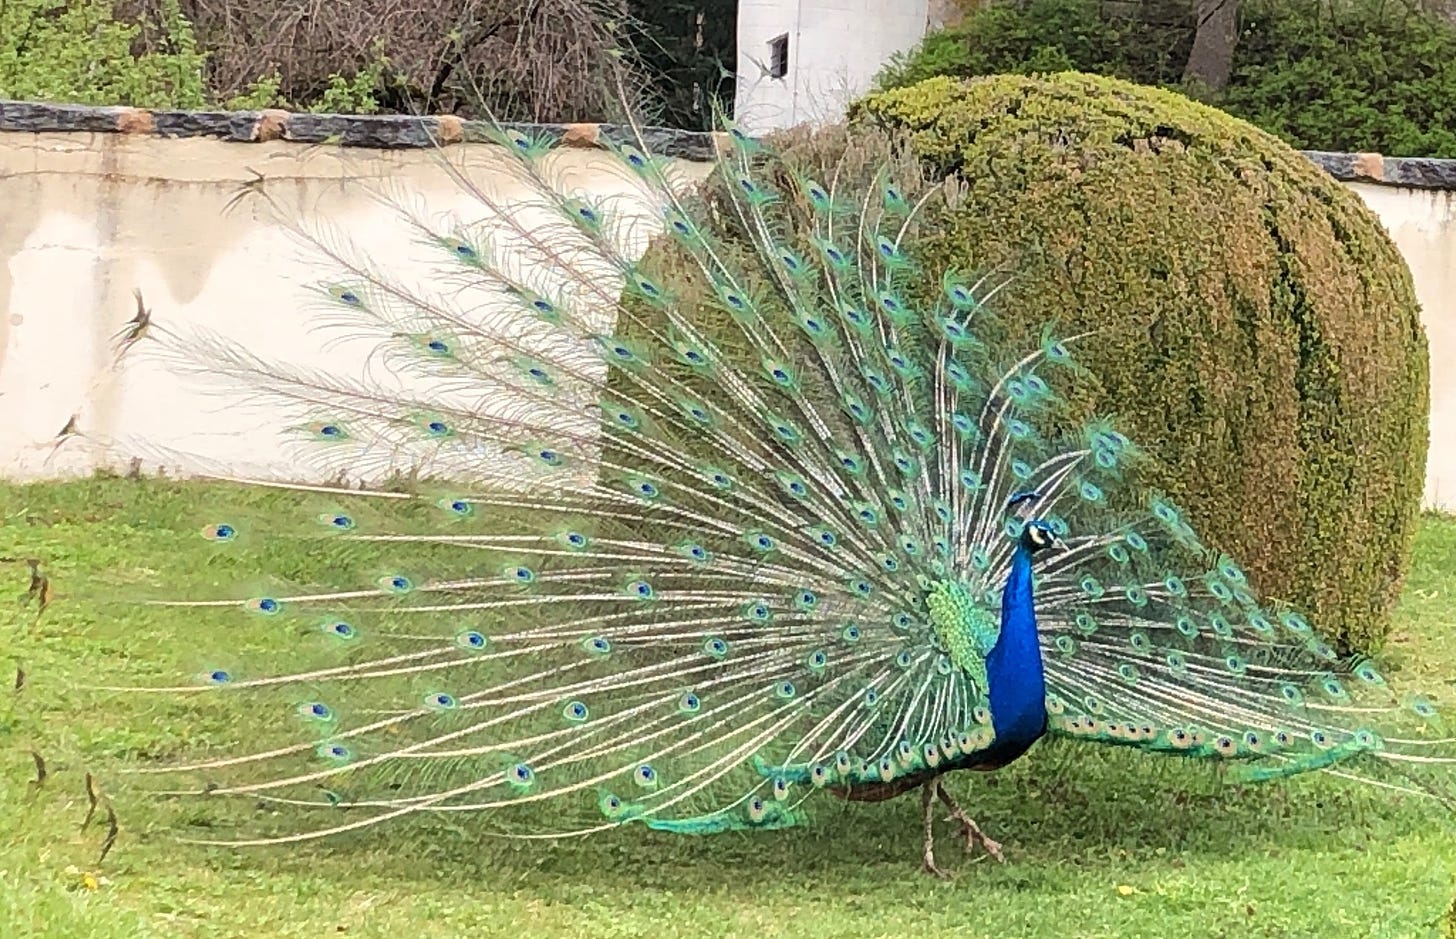 Peacock with tail spread out, in front of a bush and a wall on a lawn.